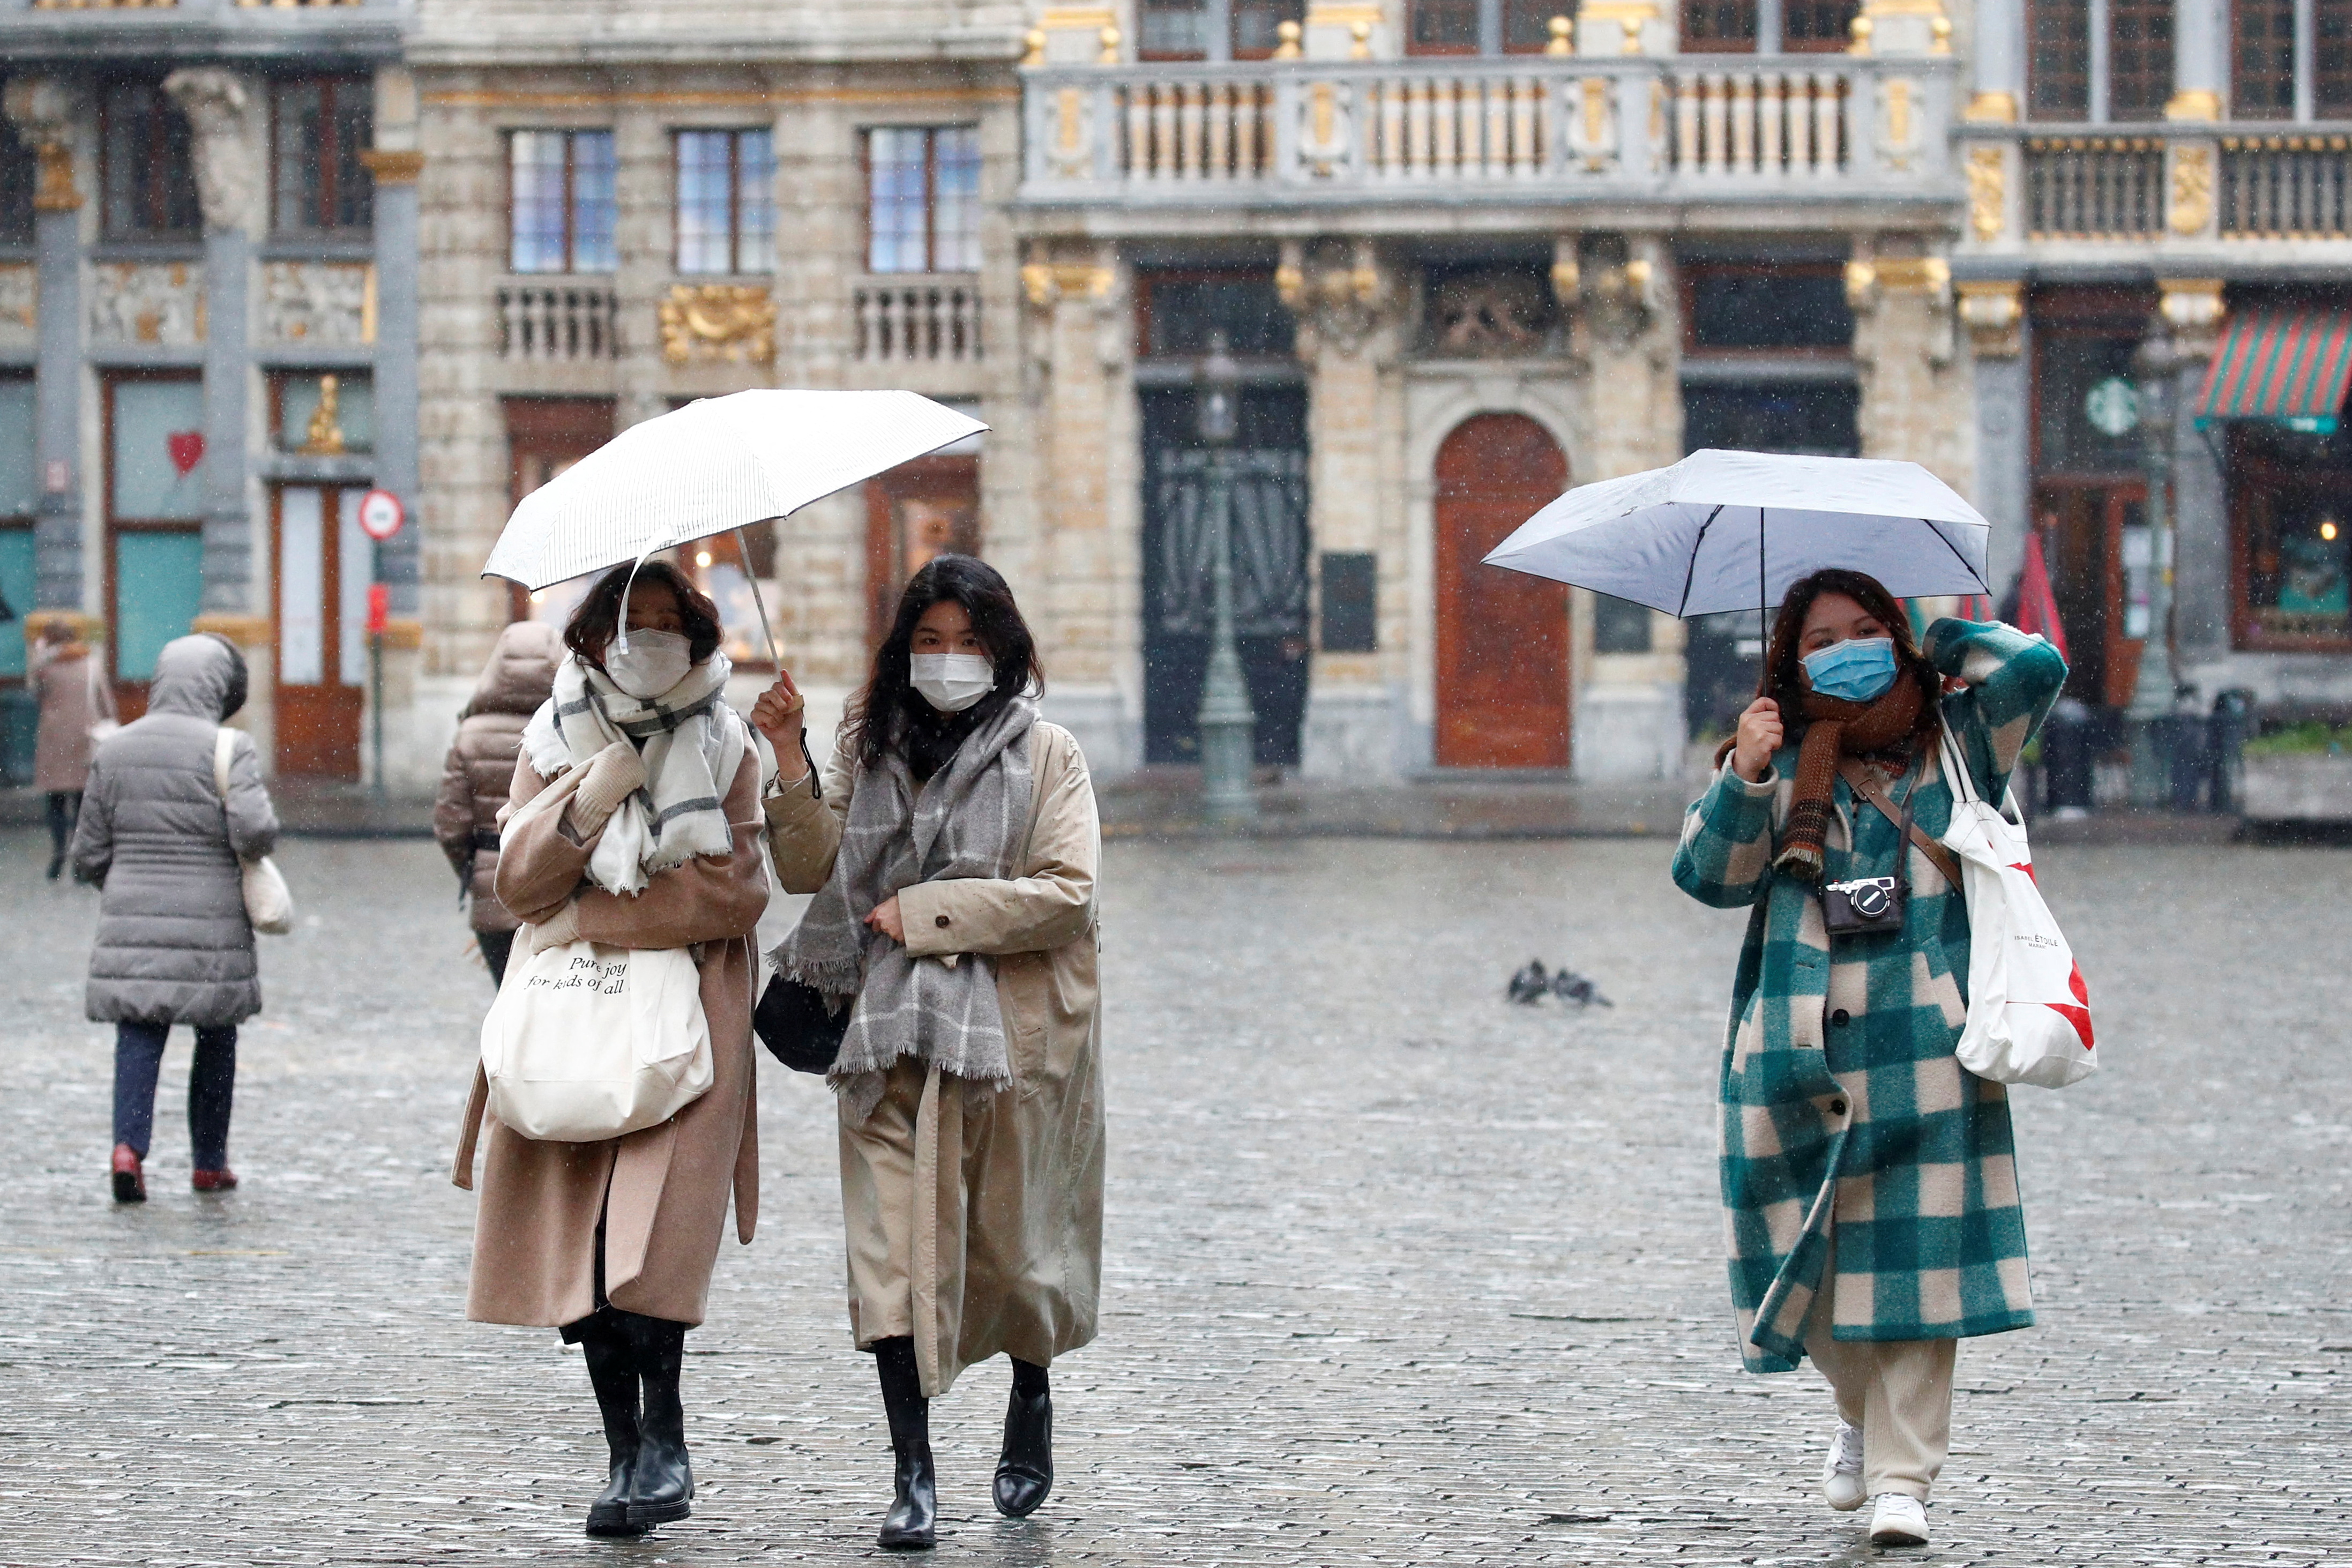 People wearing protective face masks walk on a street in Brussels